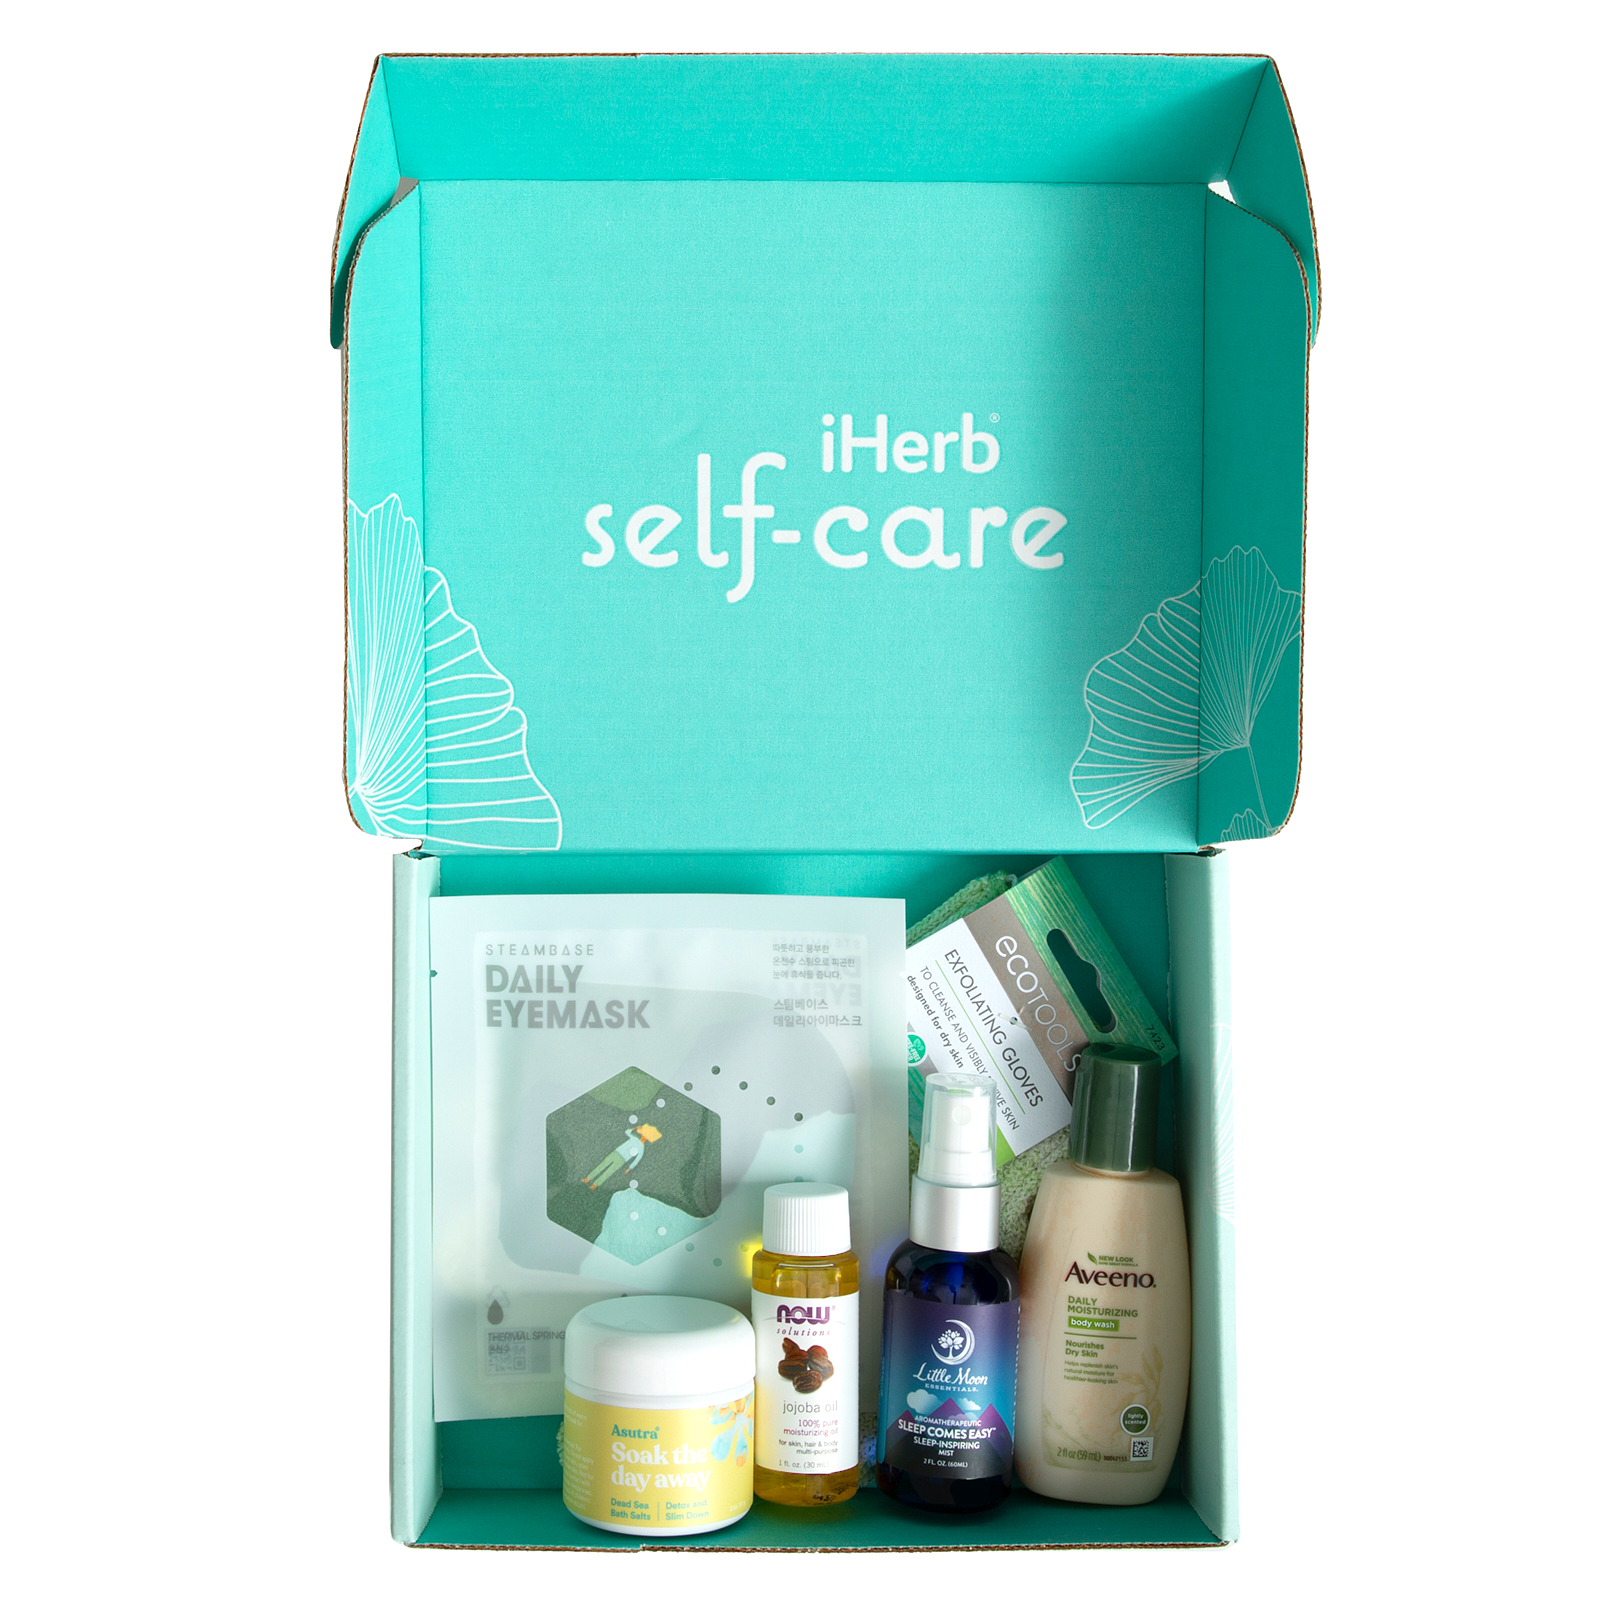 soothe big business launch kit